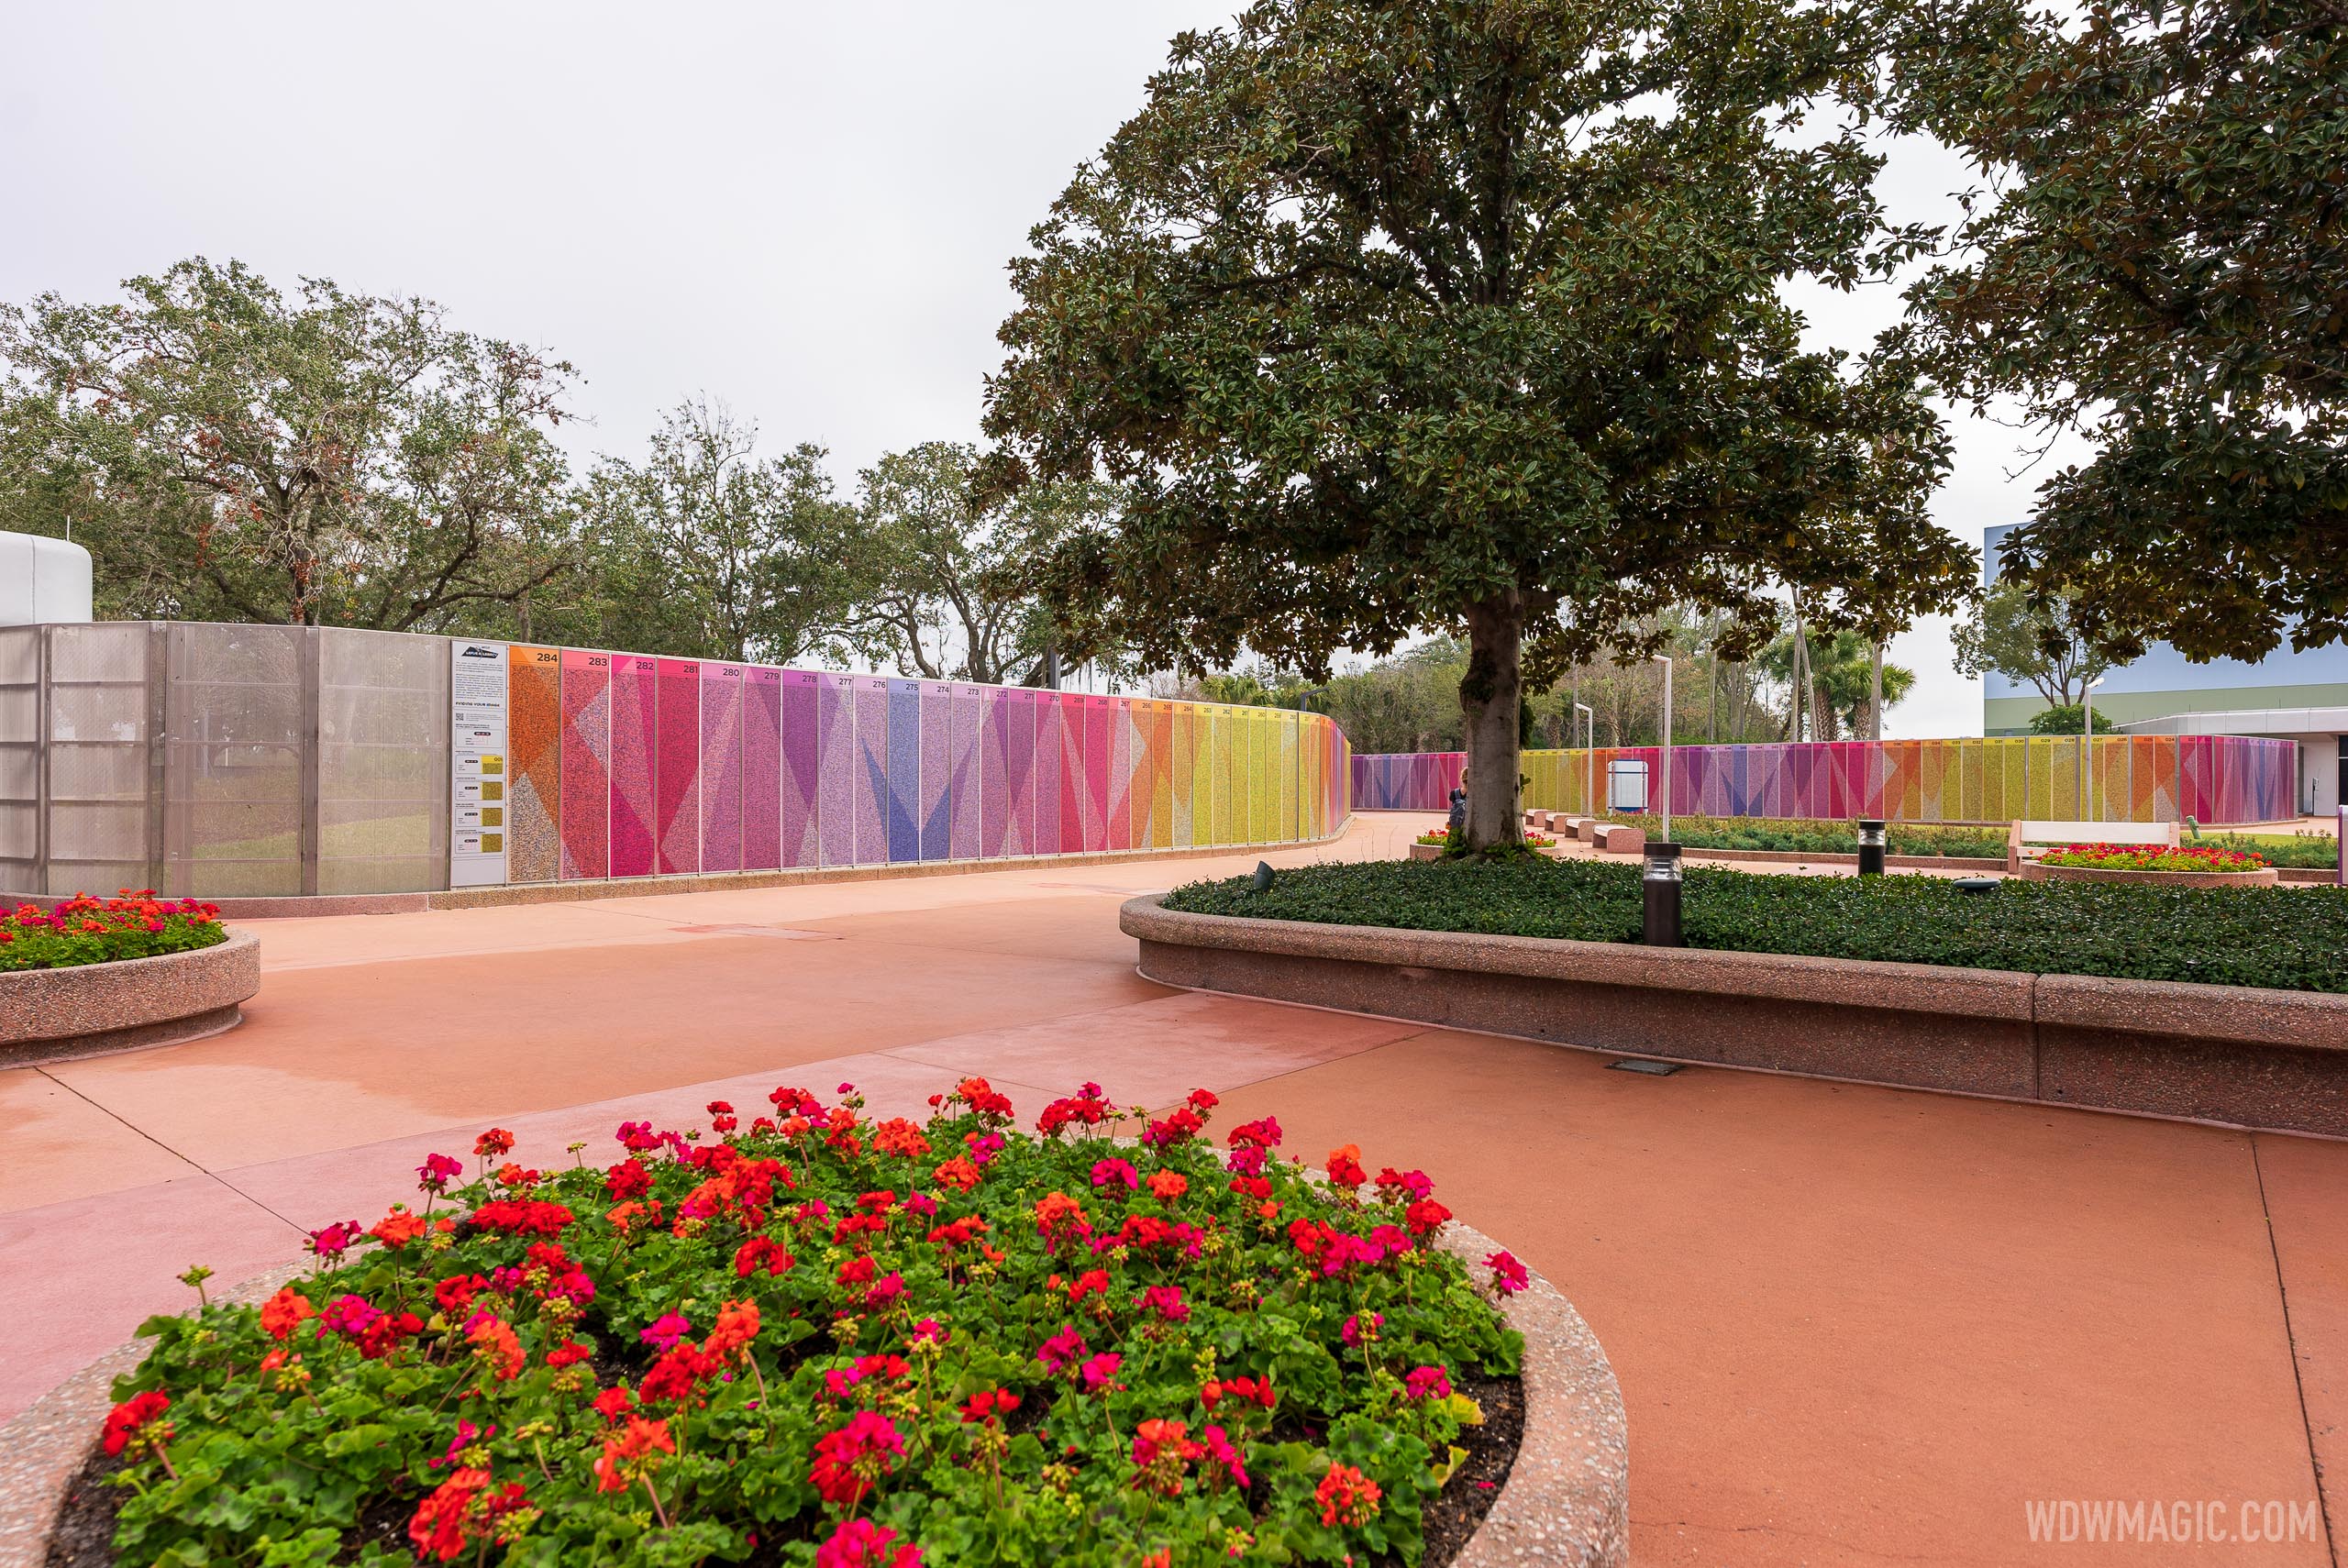 More Leave a Legacy walls now on display at EPCOT